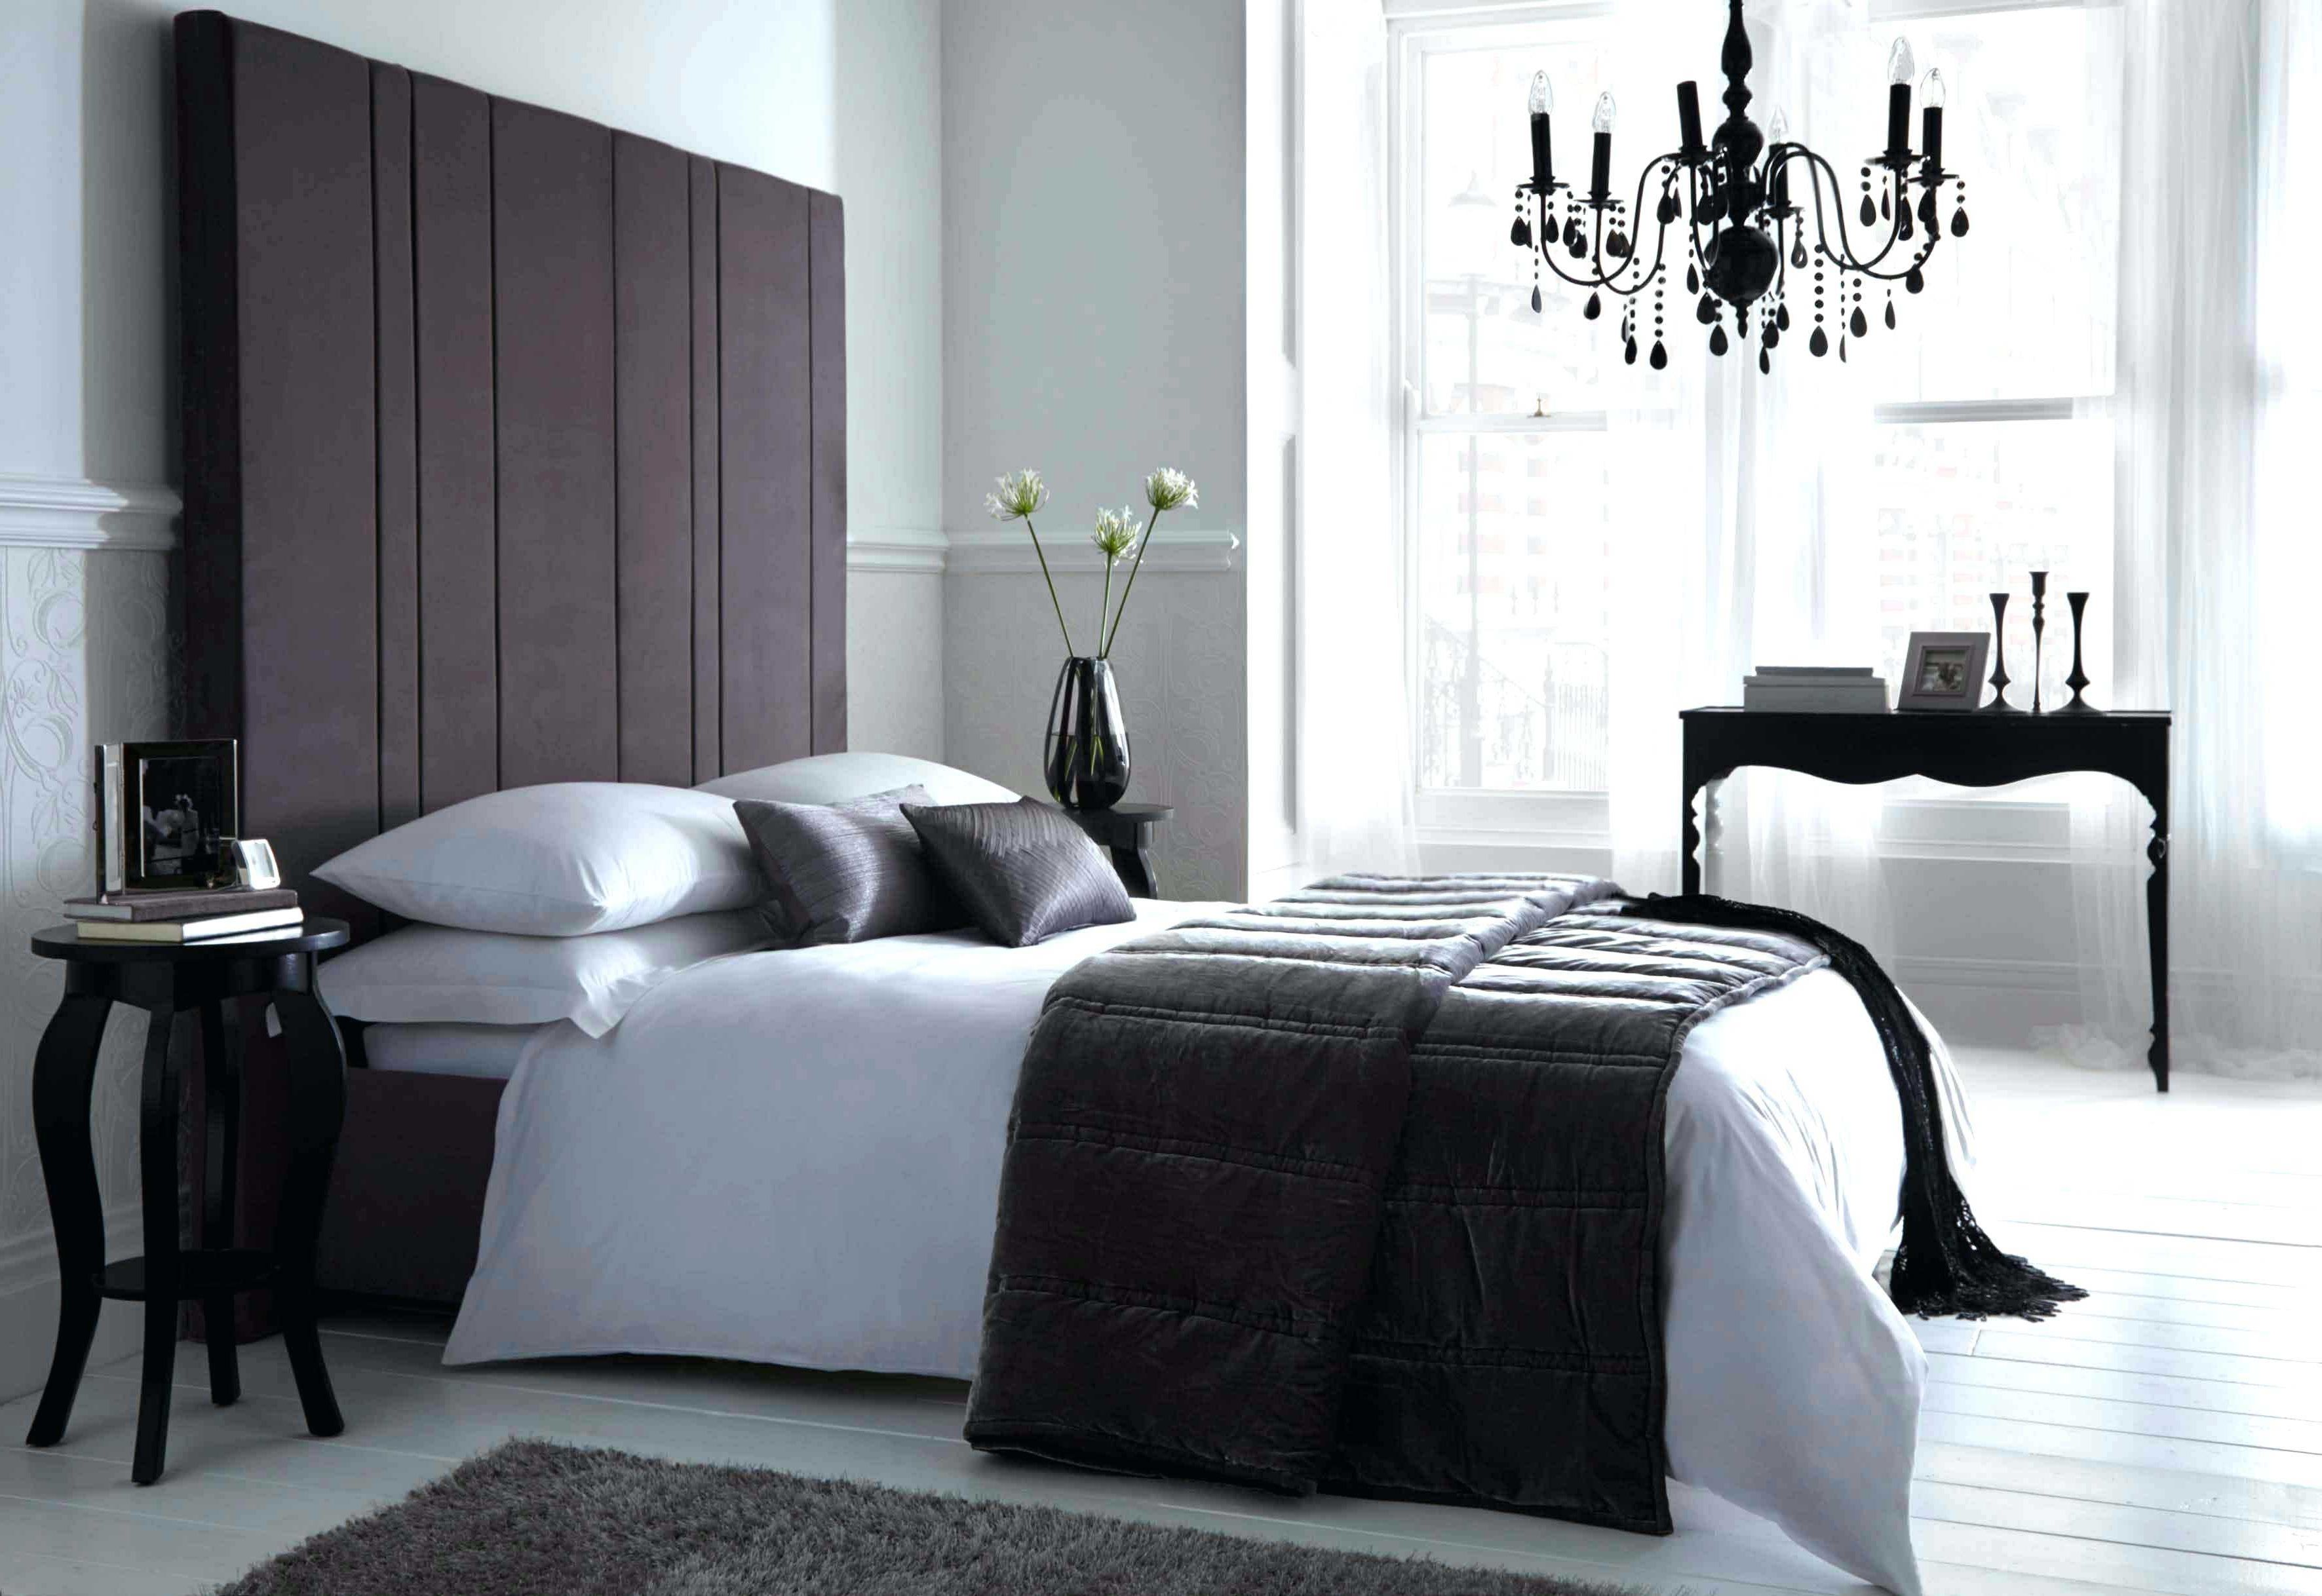 Awesome Cheap Black Chandelier For Bedroom With Chandeliers Trends Inside Popular Black Chandelier Bedroom (View 1 of 20)